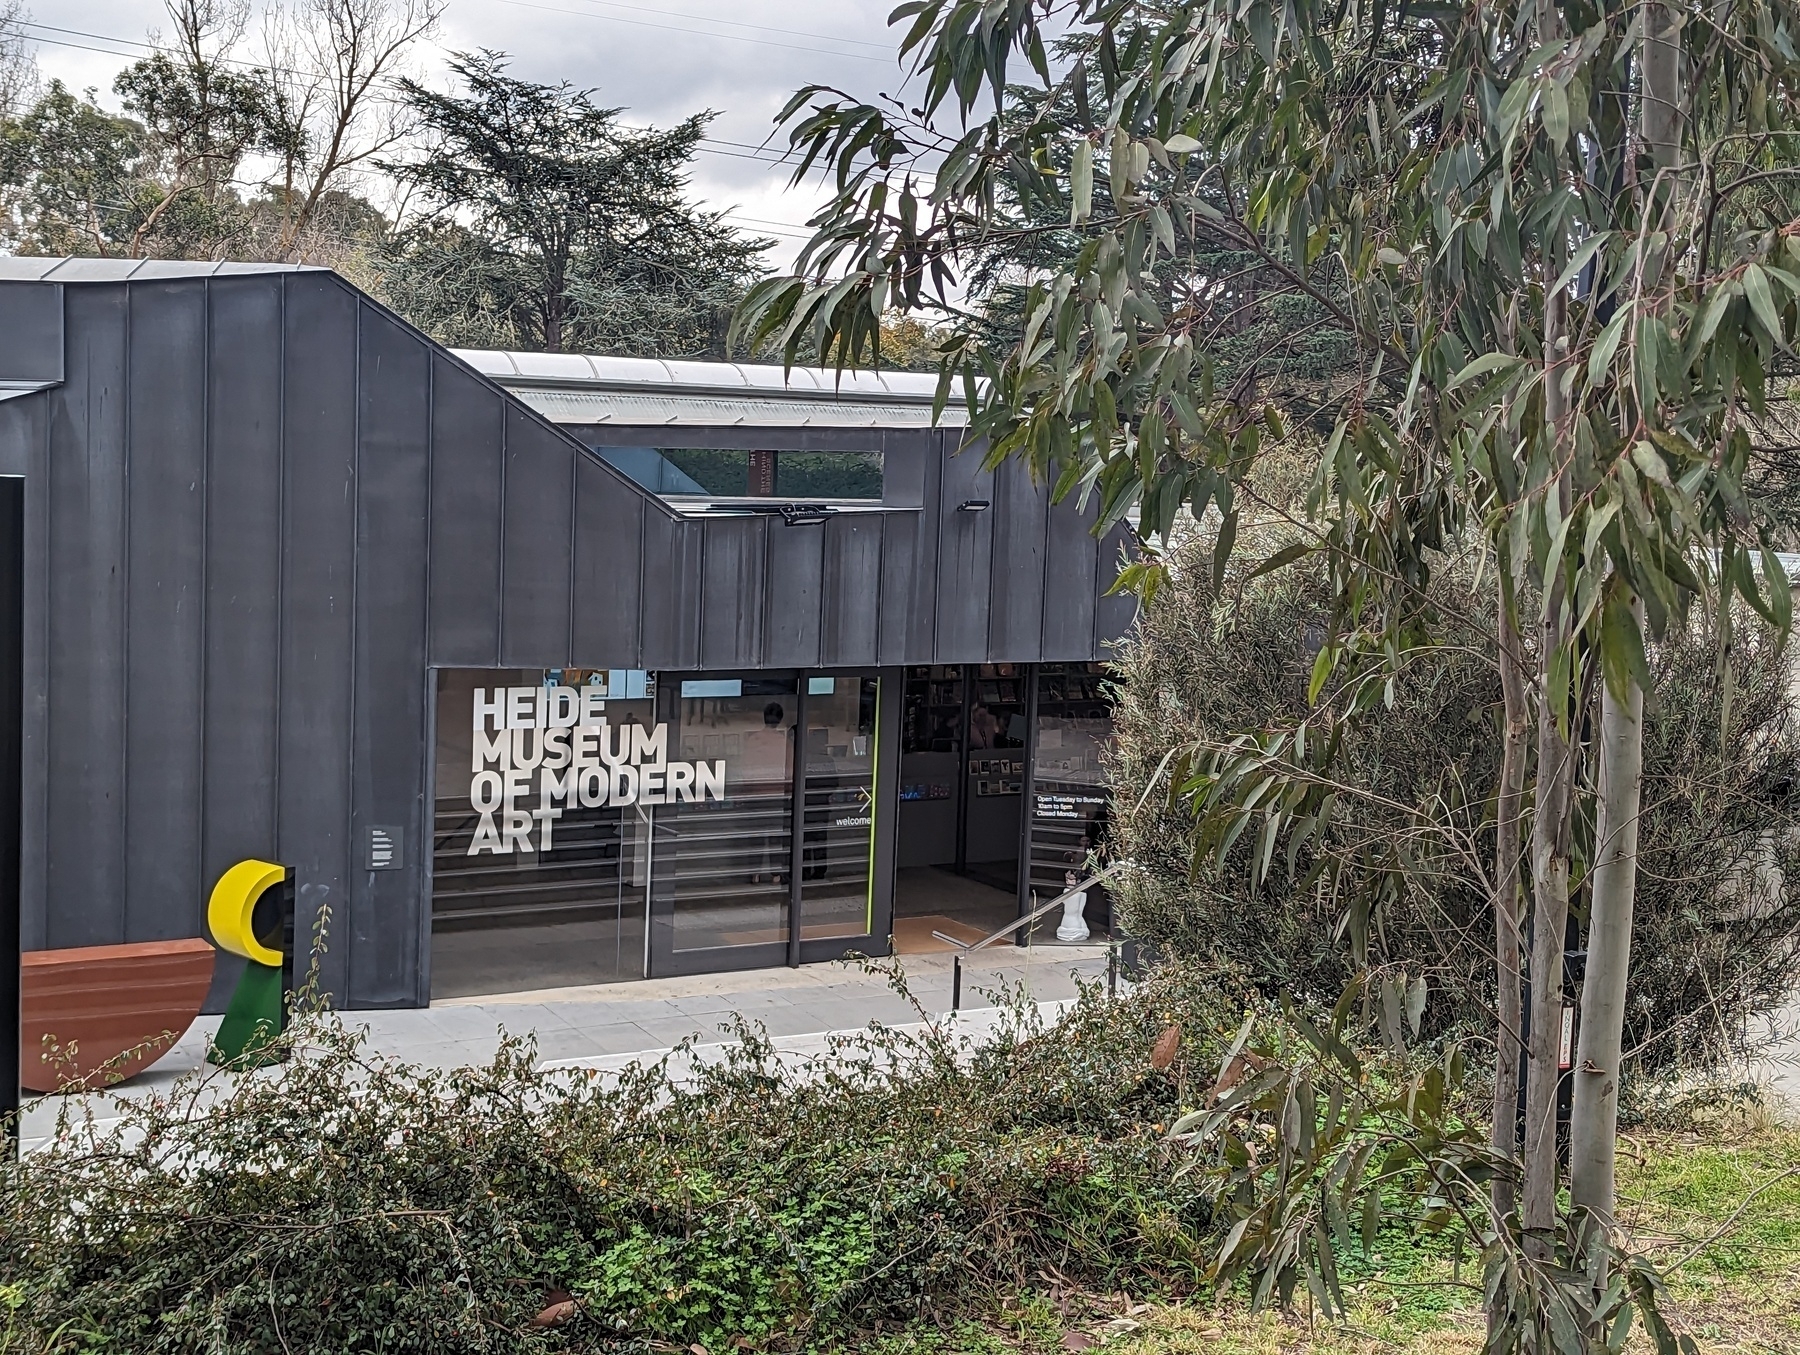 The main exhibition building of the Heide Museum of Modern Art